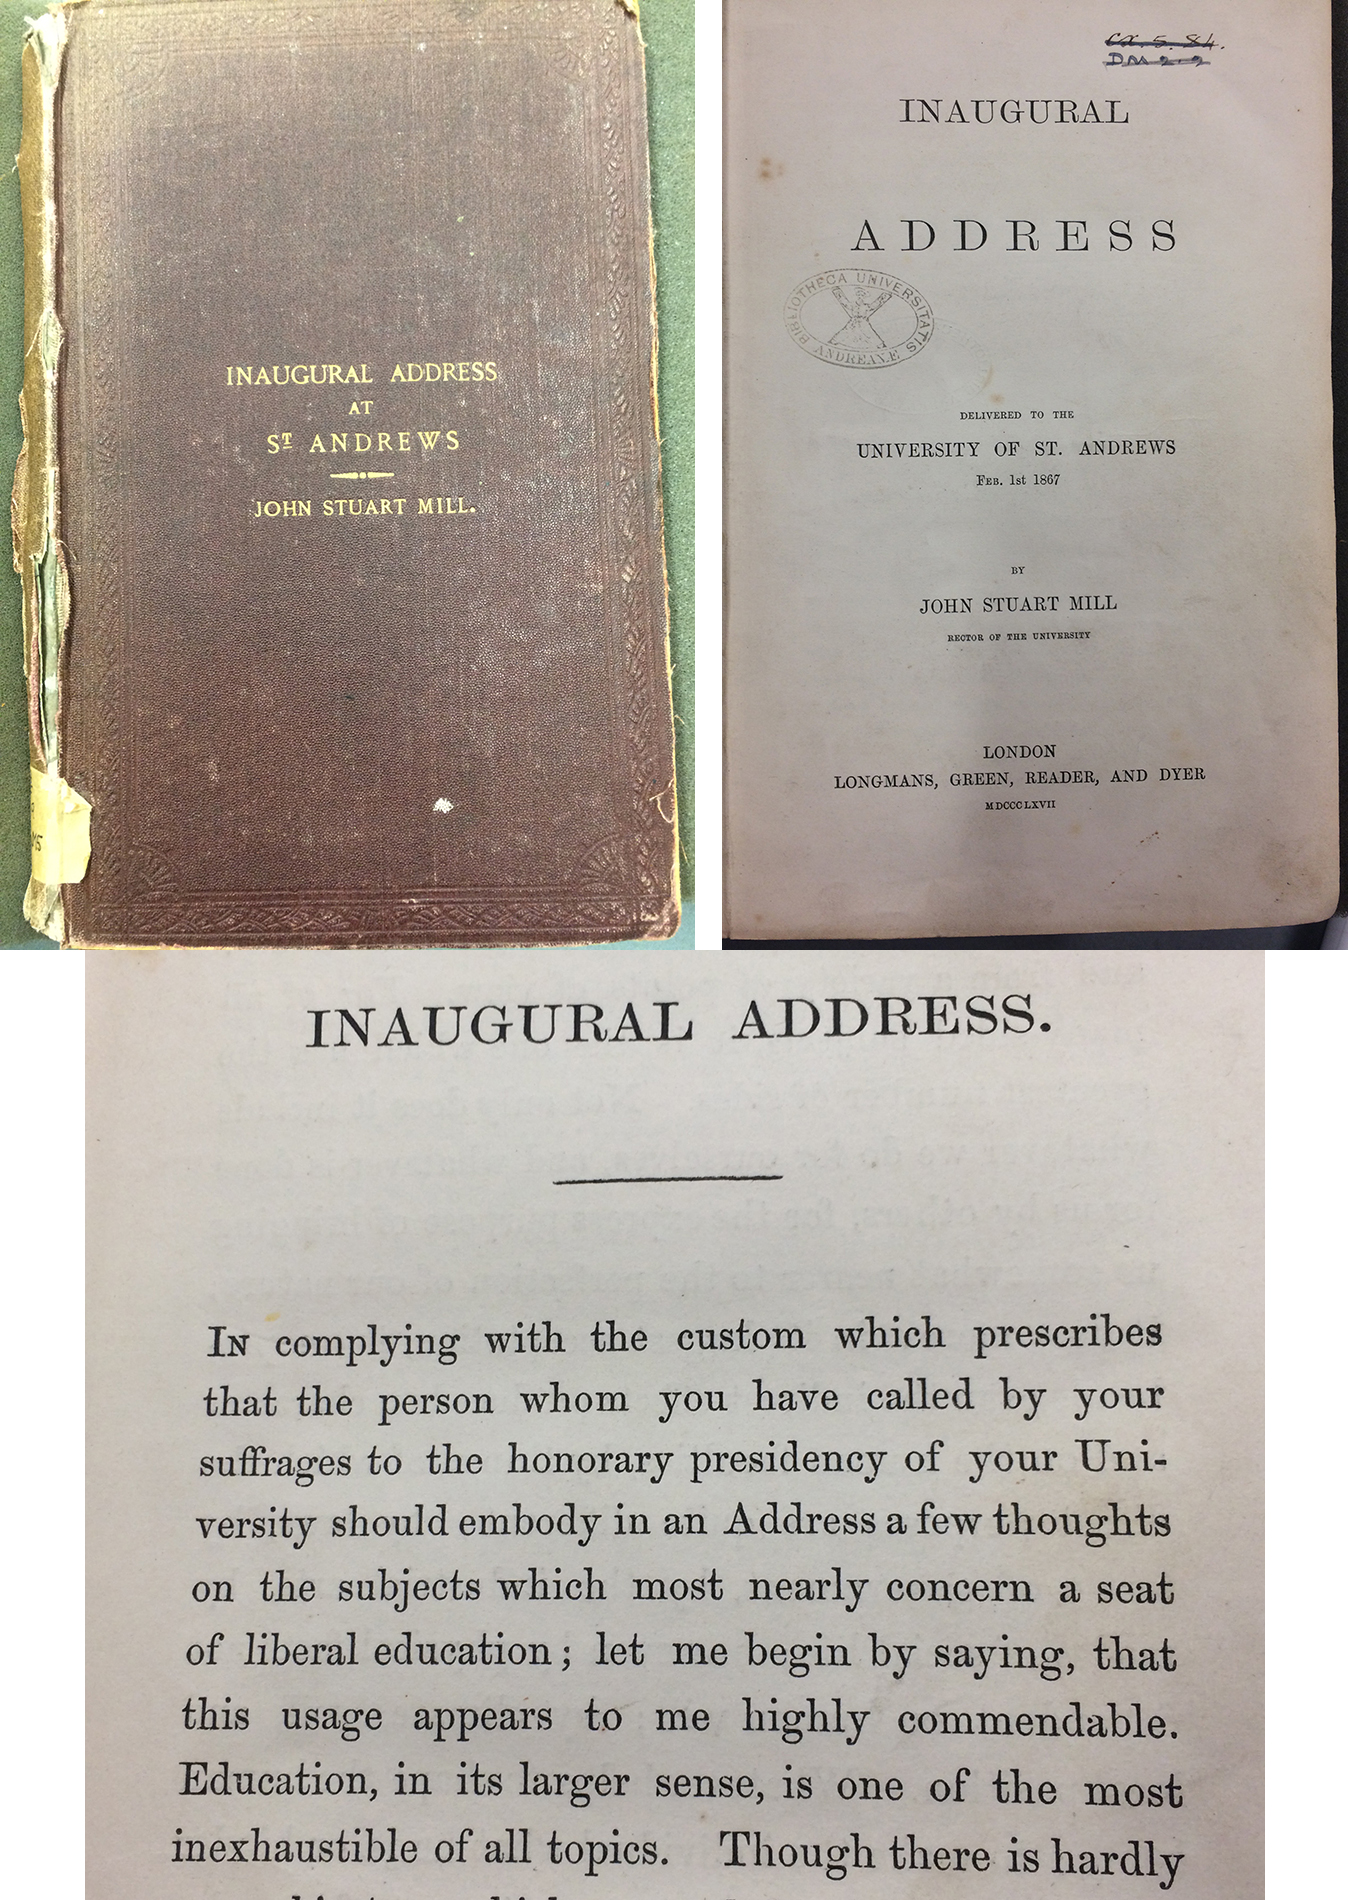 A rather well-used copy of the inaugural address delivered by JS Mill on 1 February 1867. StA LF1119.R4M5.